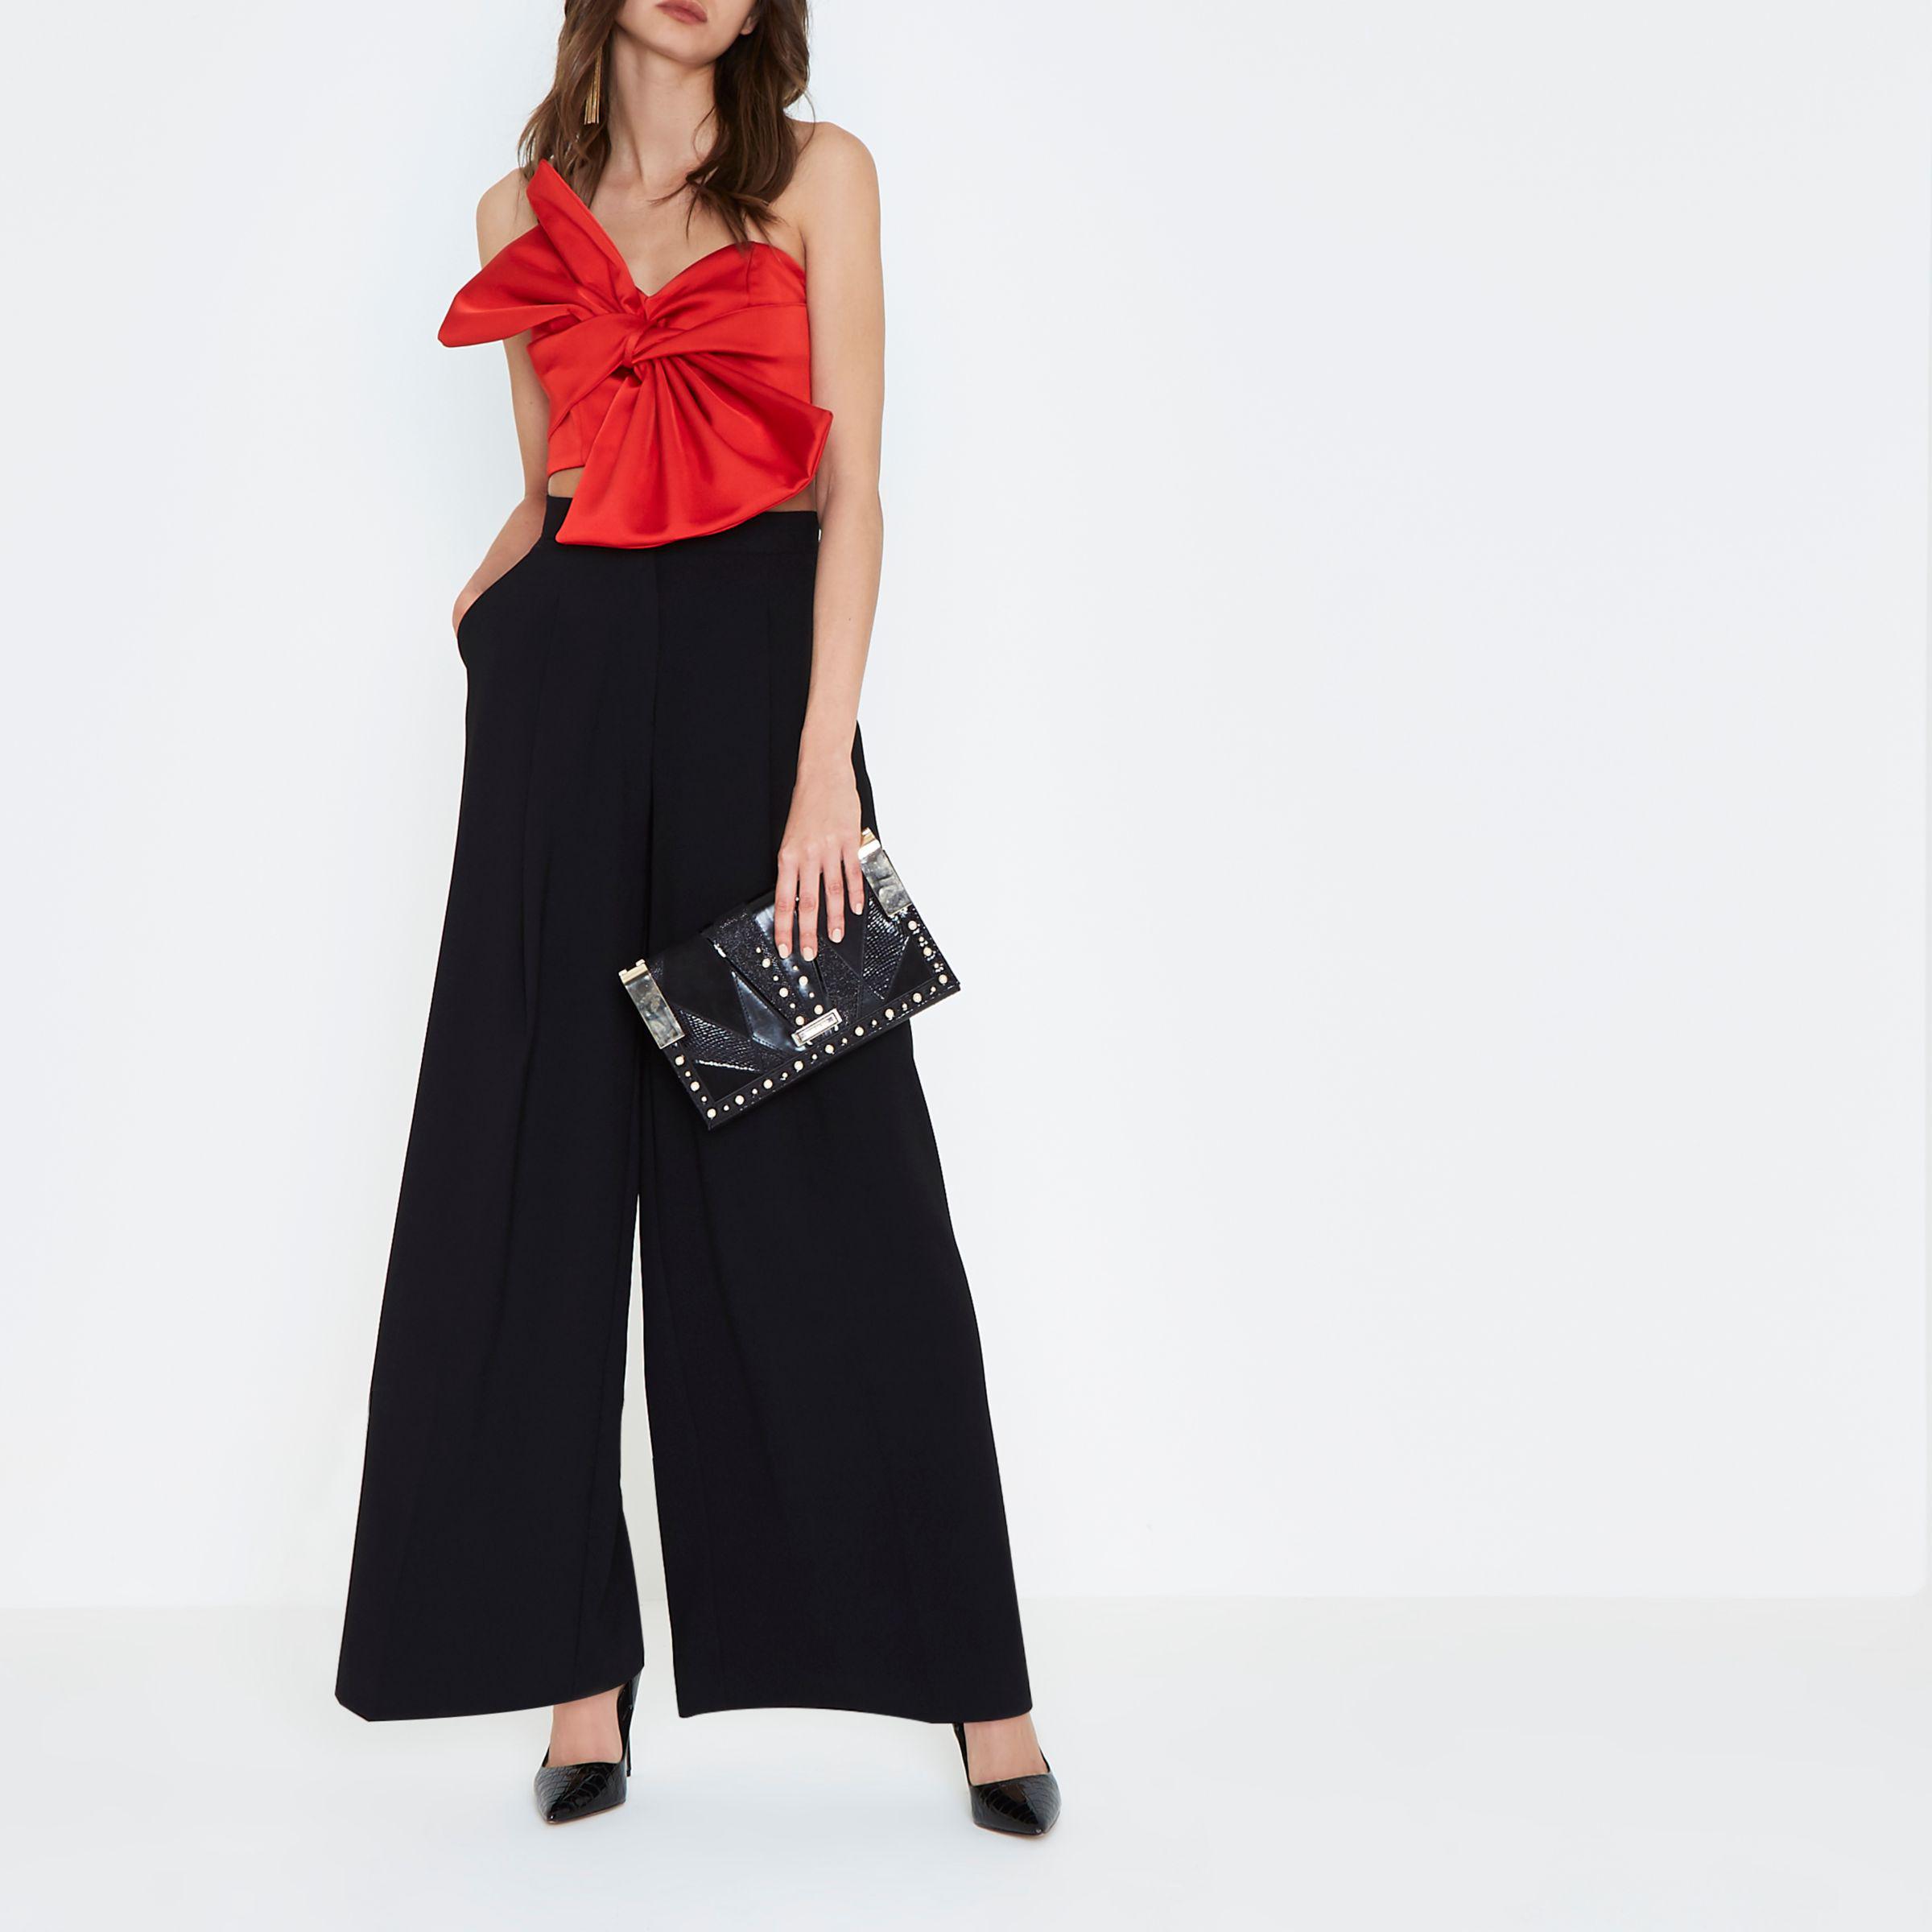 River Island Red Oversized Bow Bandeau Satin Crop Top | Lyst